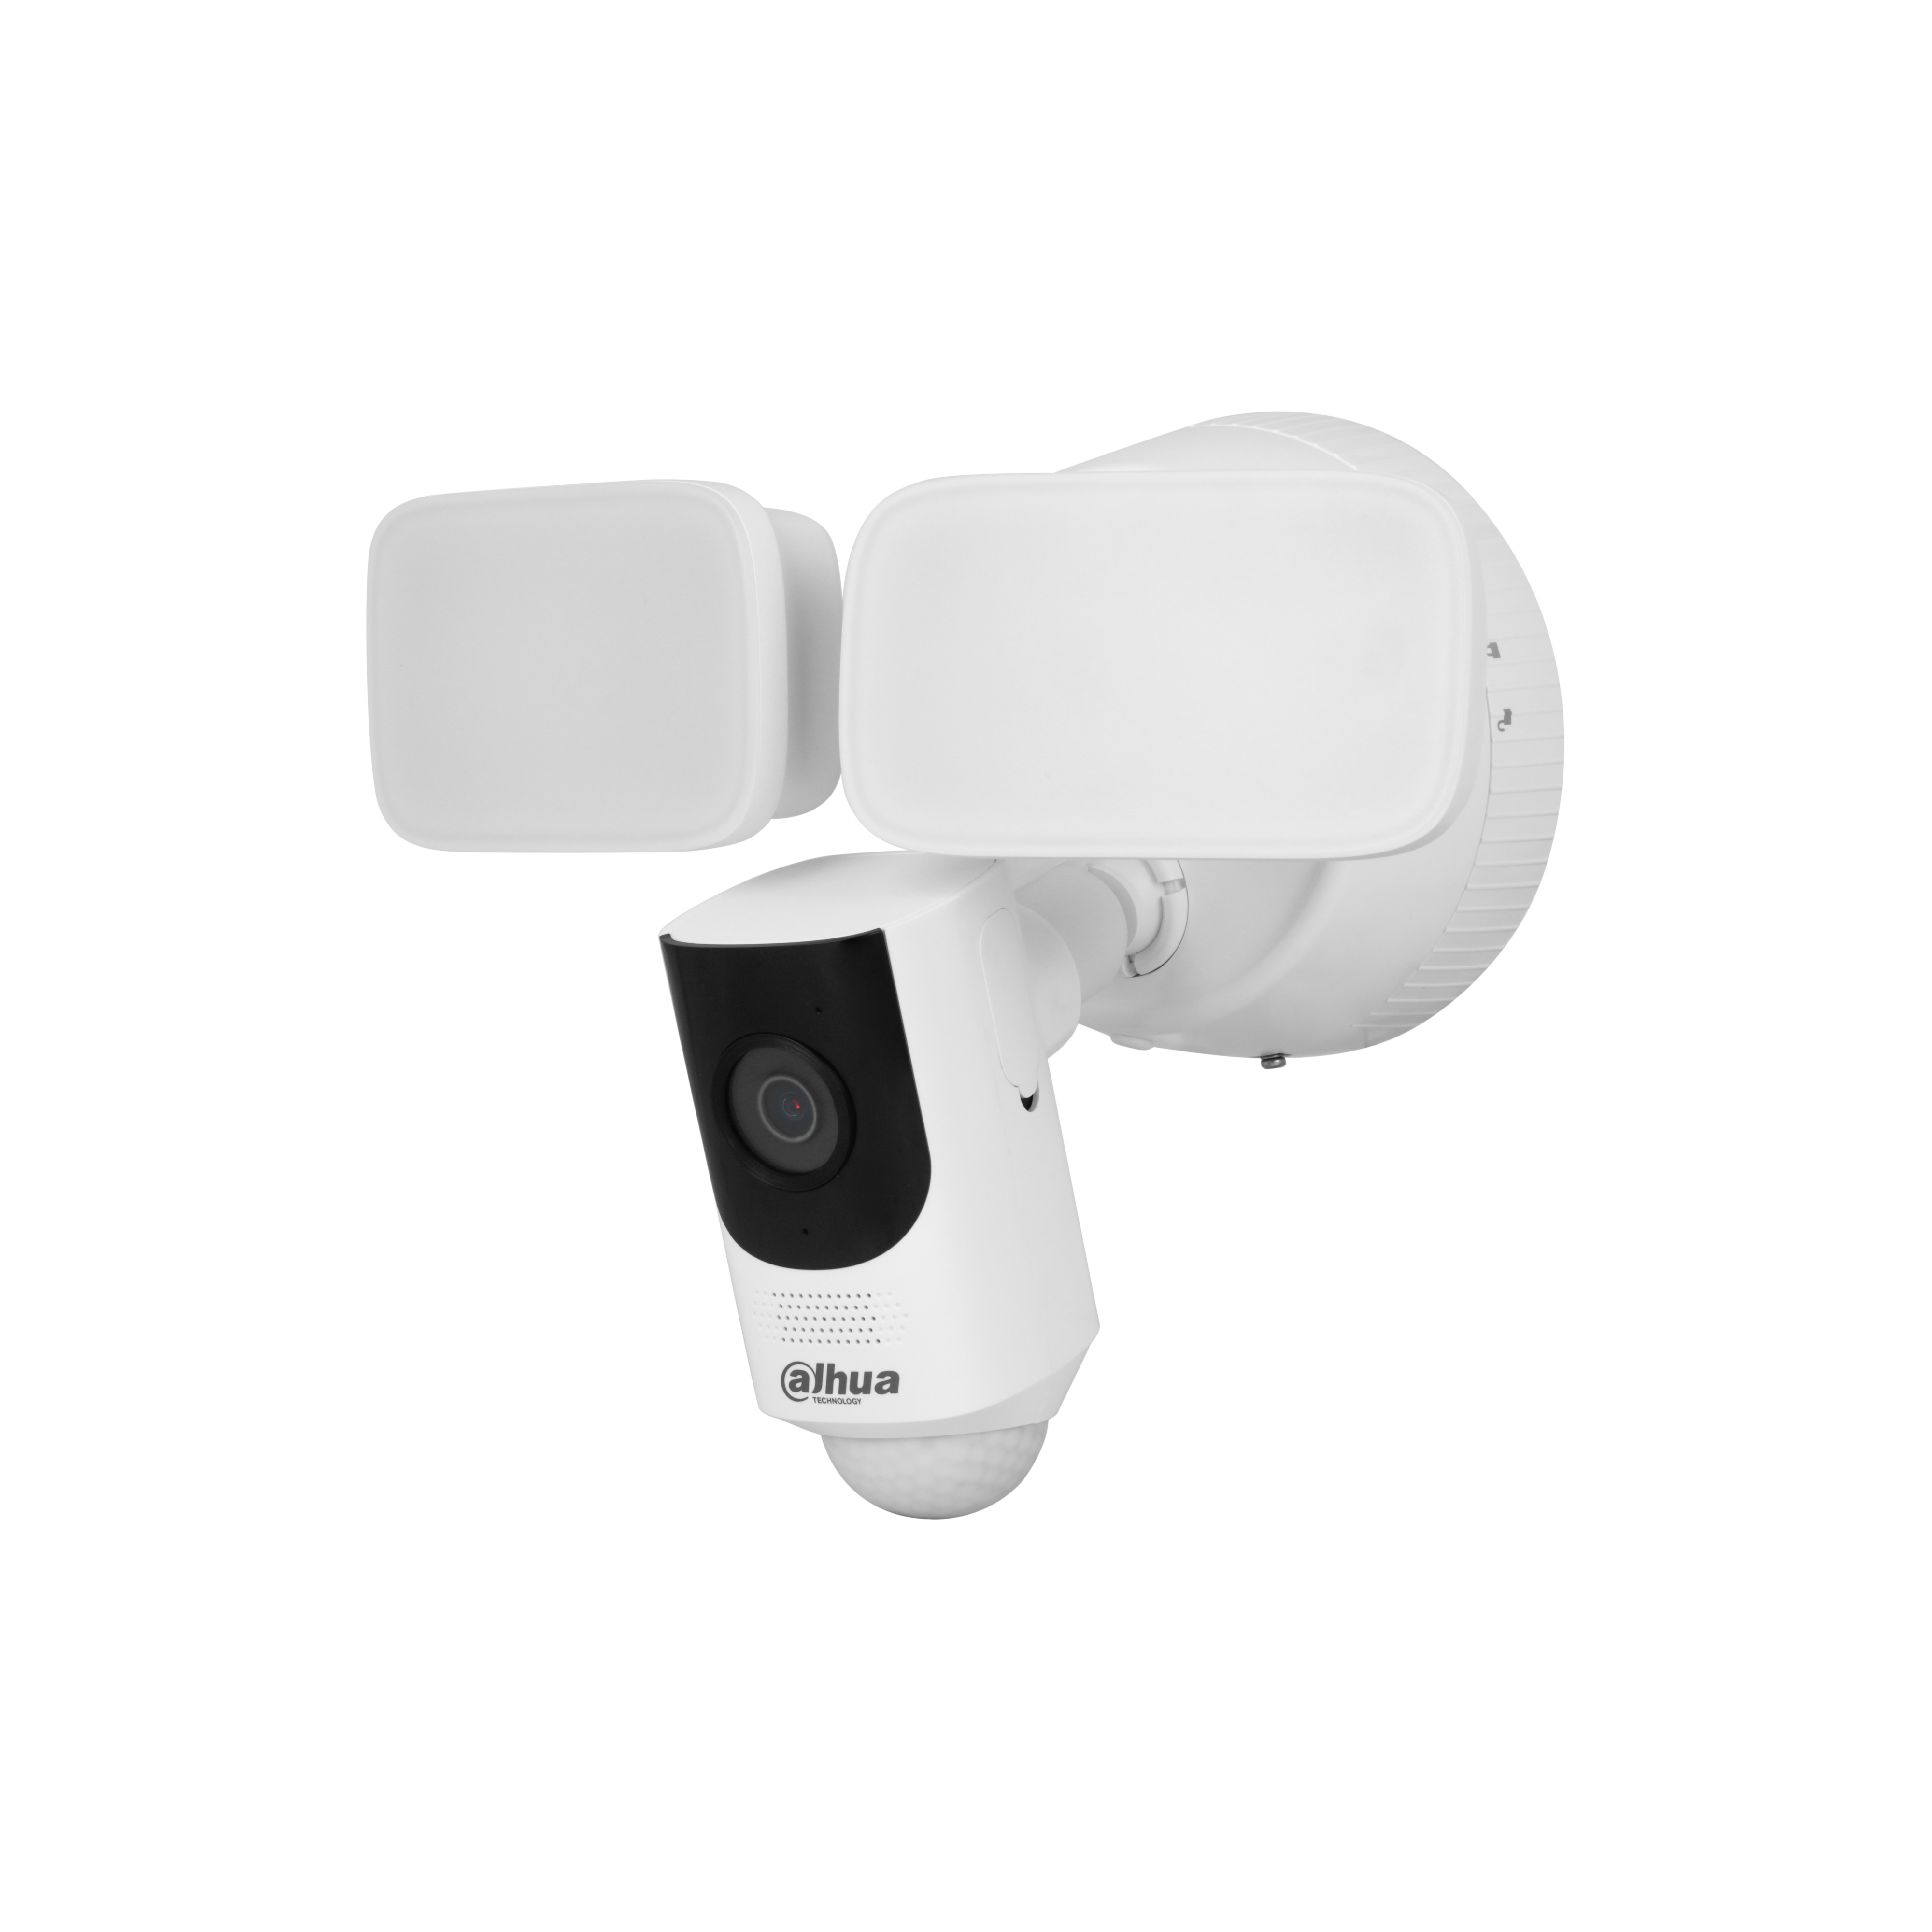 WIFI SERIES IP CAMERA WHITE 4MP H.264/4+/5/5+ PIR DIGITAL WDR METAL 2.8MM FIXED LENS WITH FLOOD LIGHT IR 10M IP65 BUILT IN MIC SUPPORT UP TO 256GB SD 240VAC